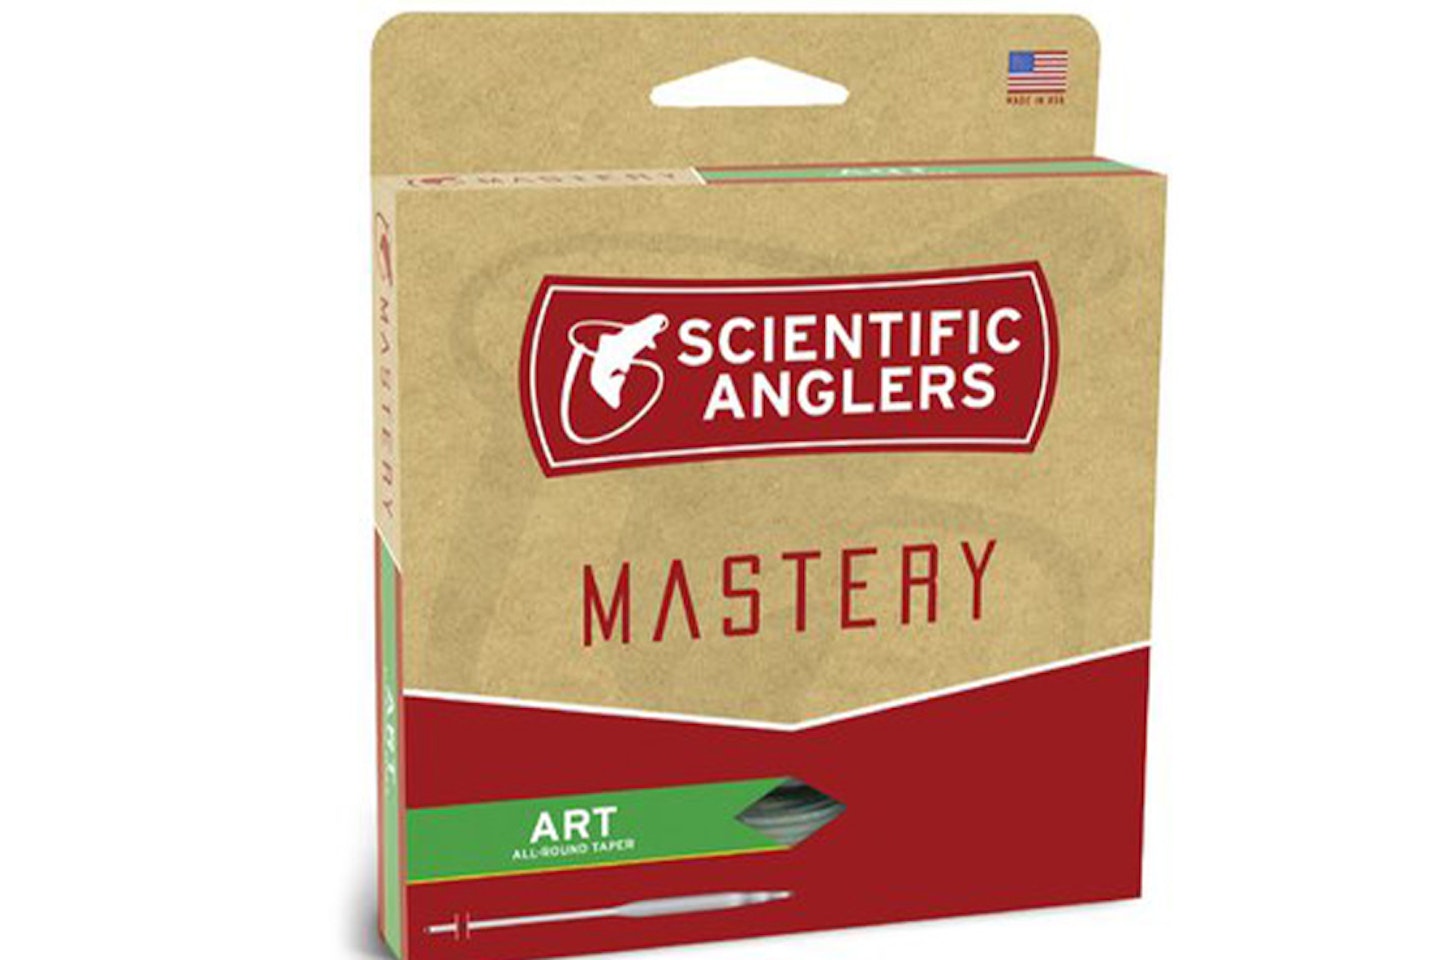 Scientific Anglers Mastery Art Fly Line